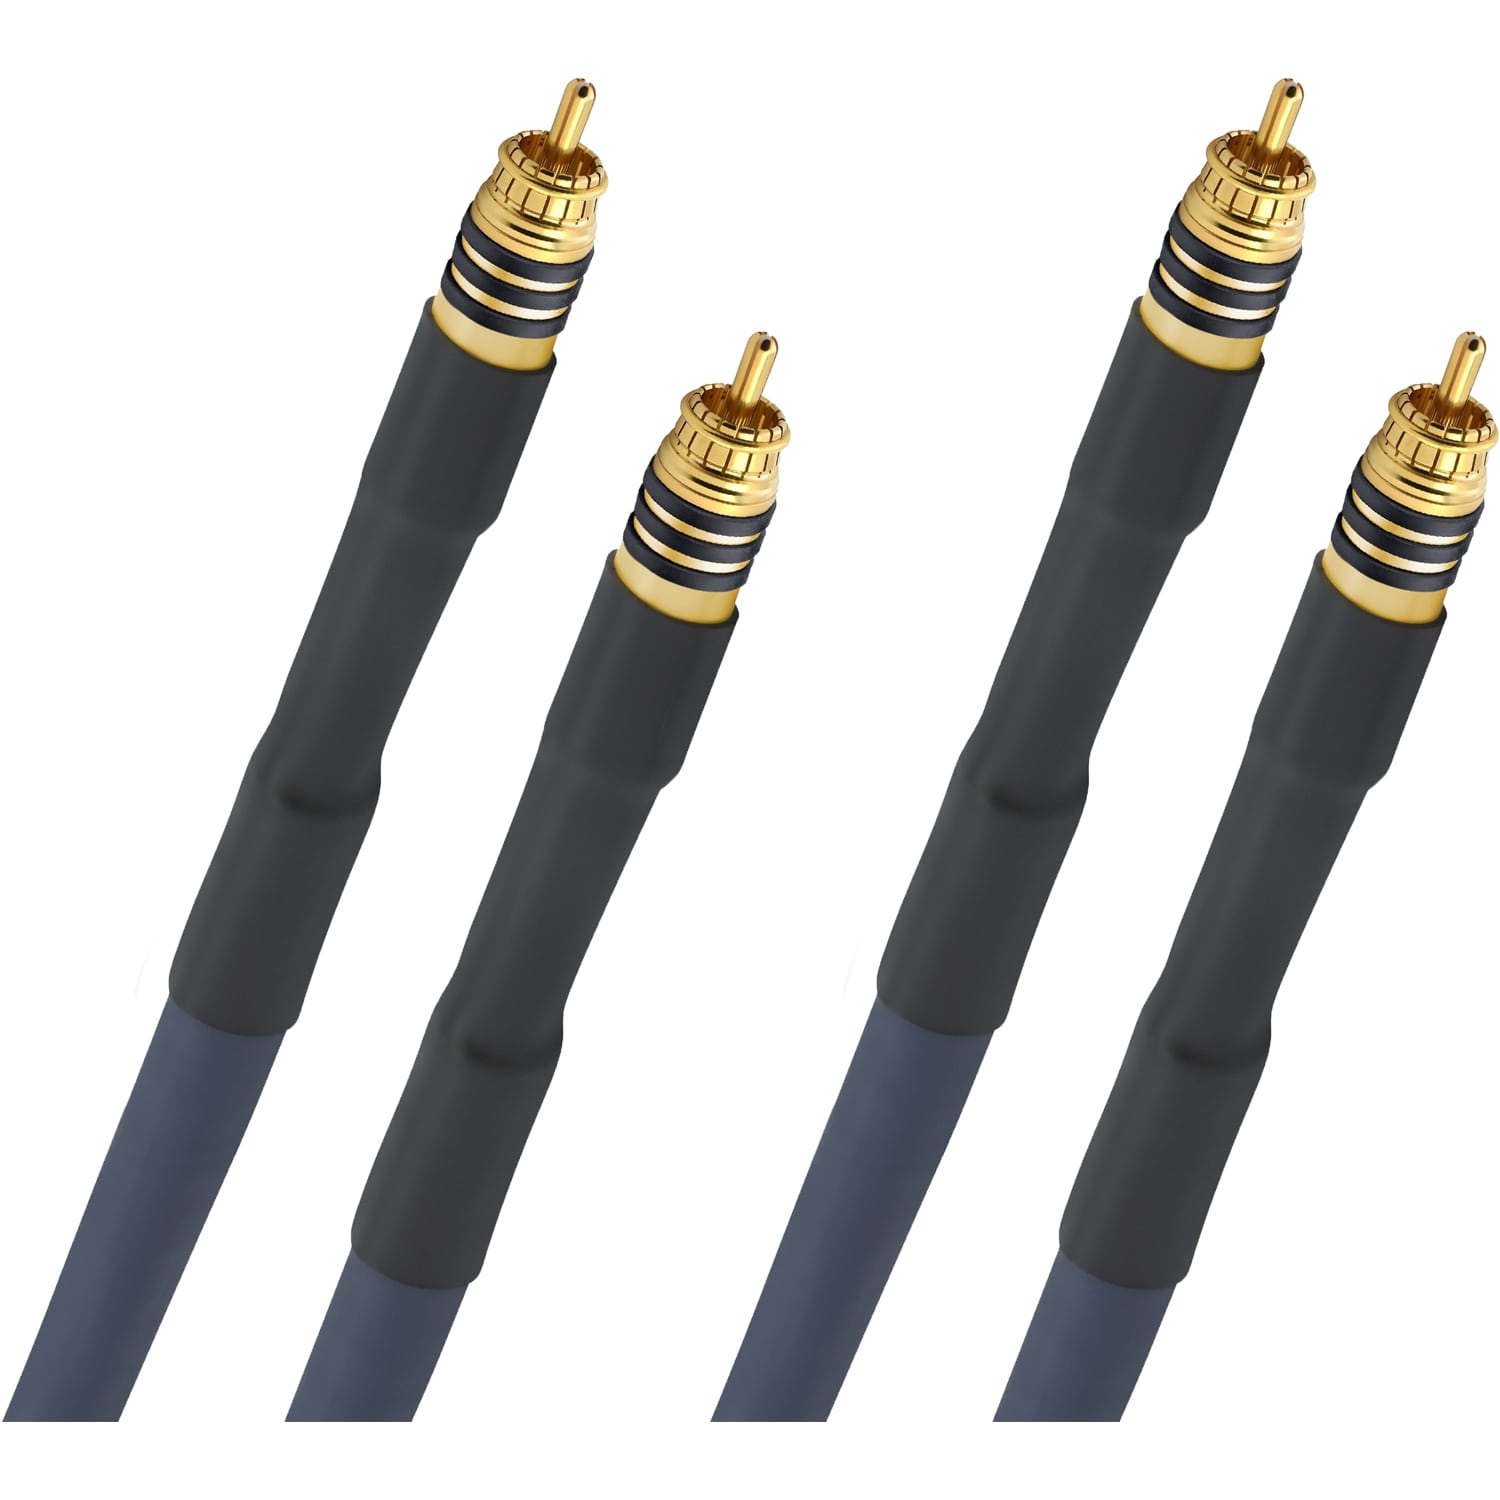 Кабели межблочные аудио Oehlbach STATE OF THE ART XXL Cable RCA, 2x1,50m, gold, D1C13114 кабели межблочные аудио oehlbach state of the art xxl cable rca 2x1 50m gold d1c13114